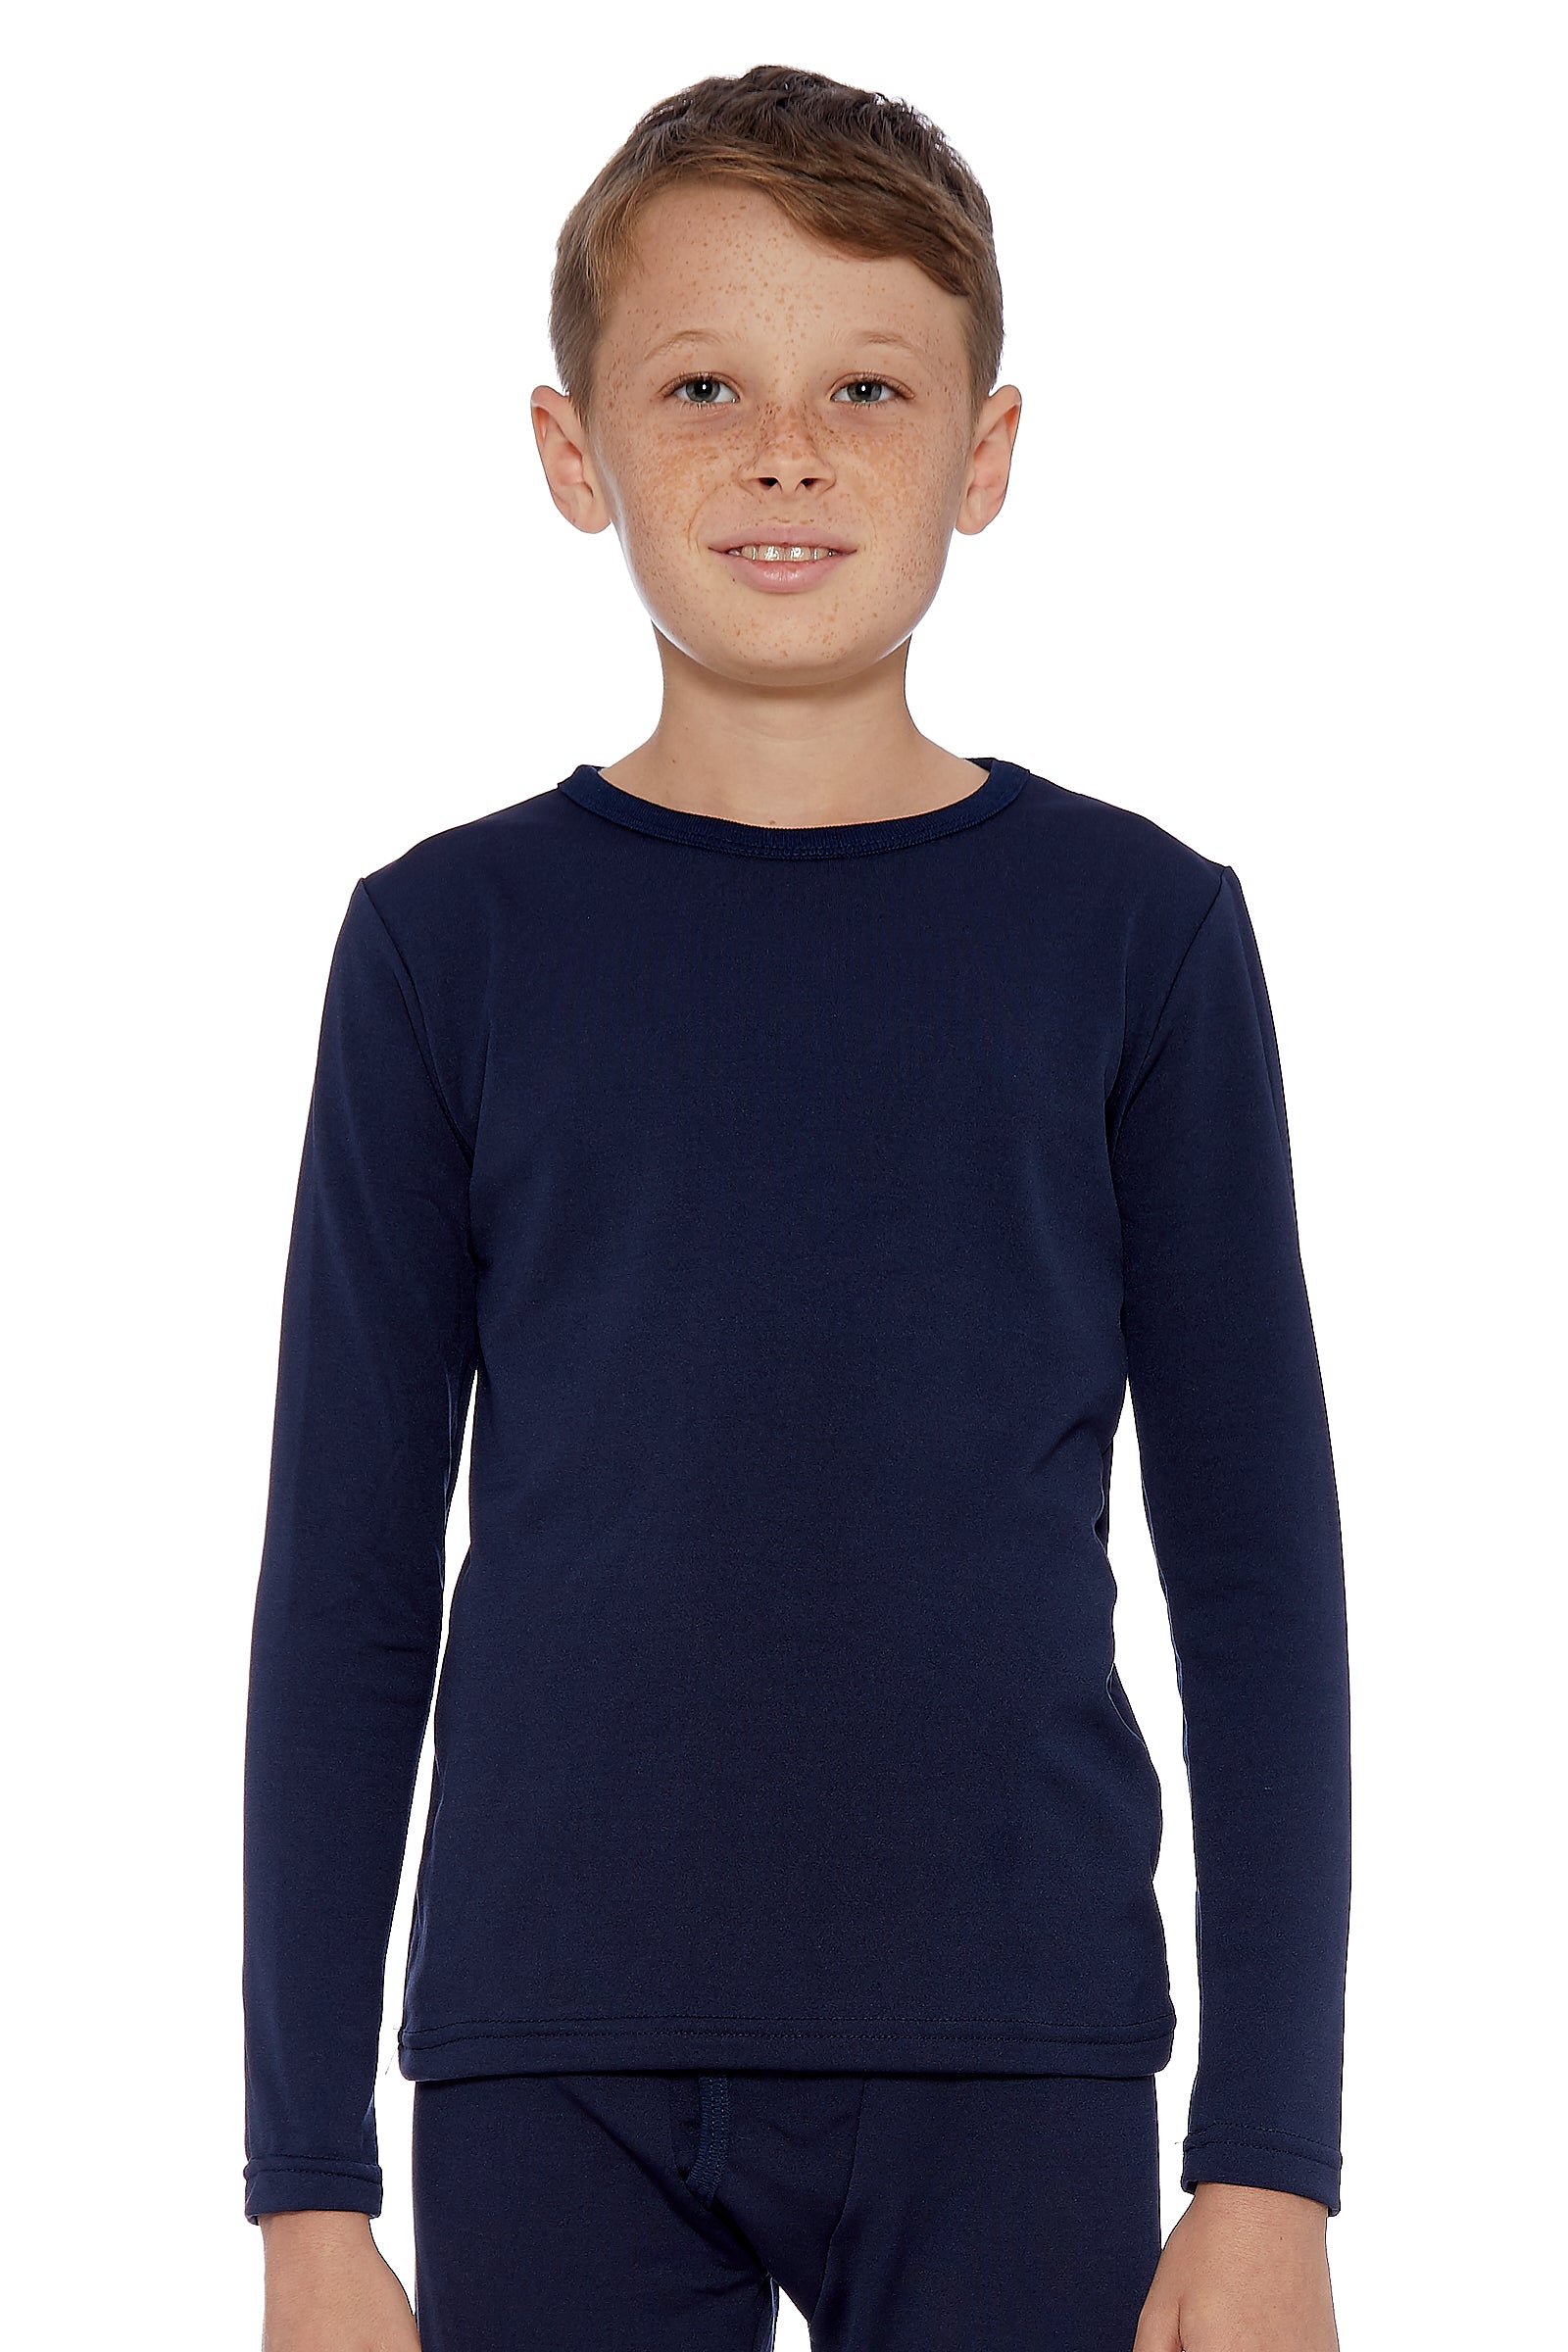 Boys Solid Thermal Top